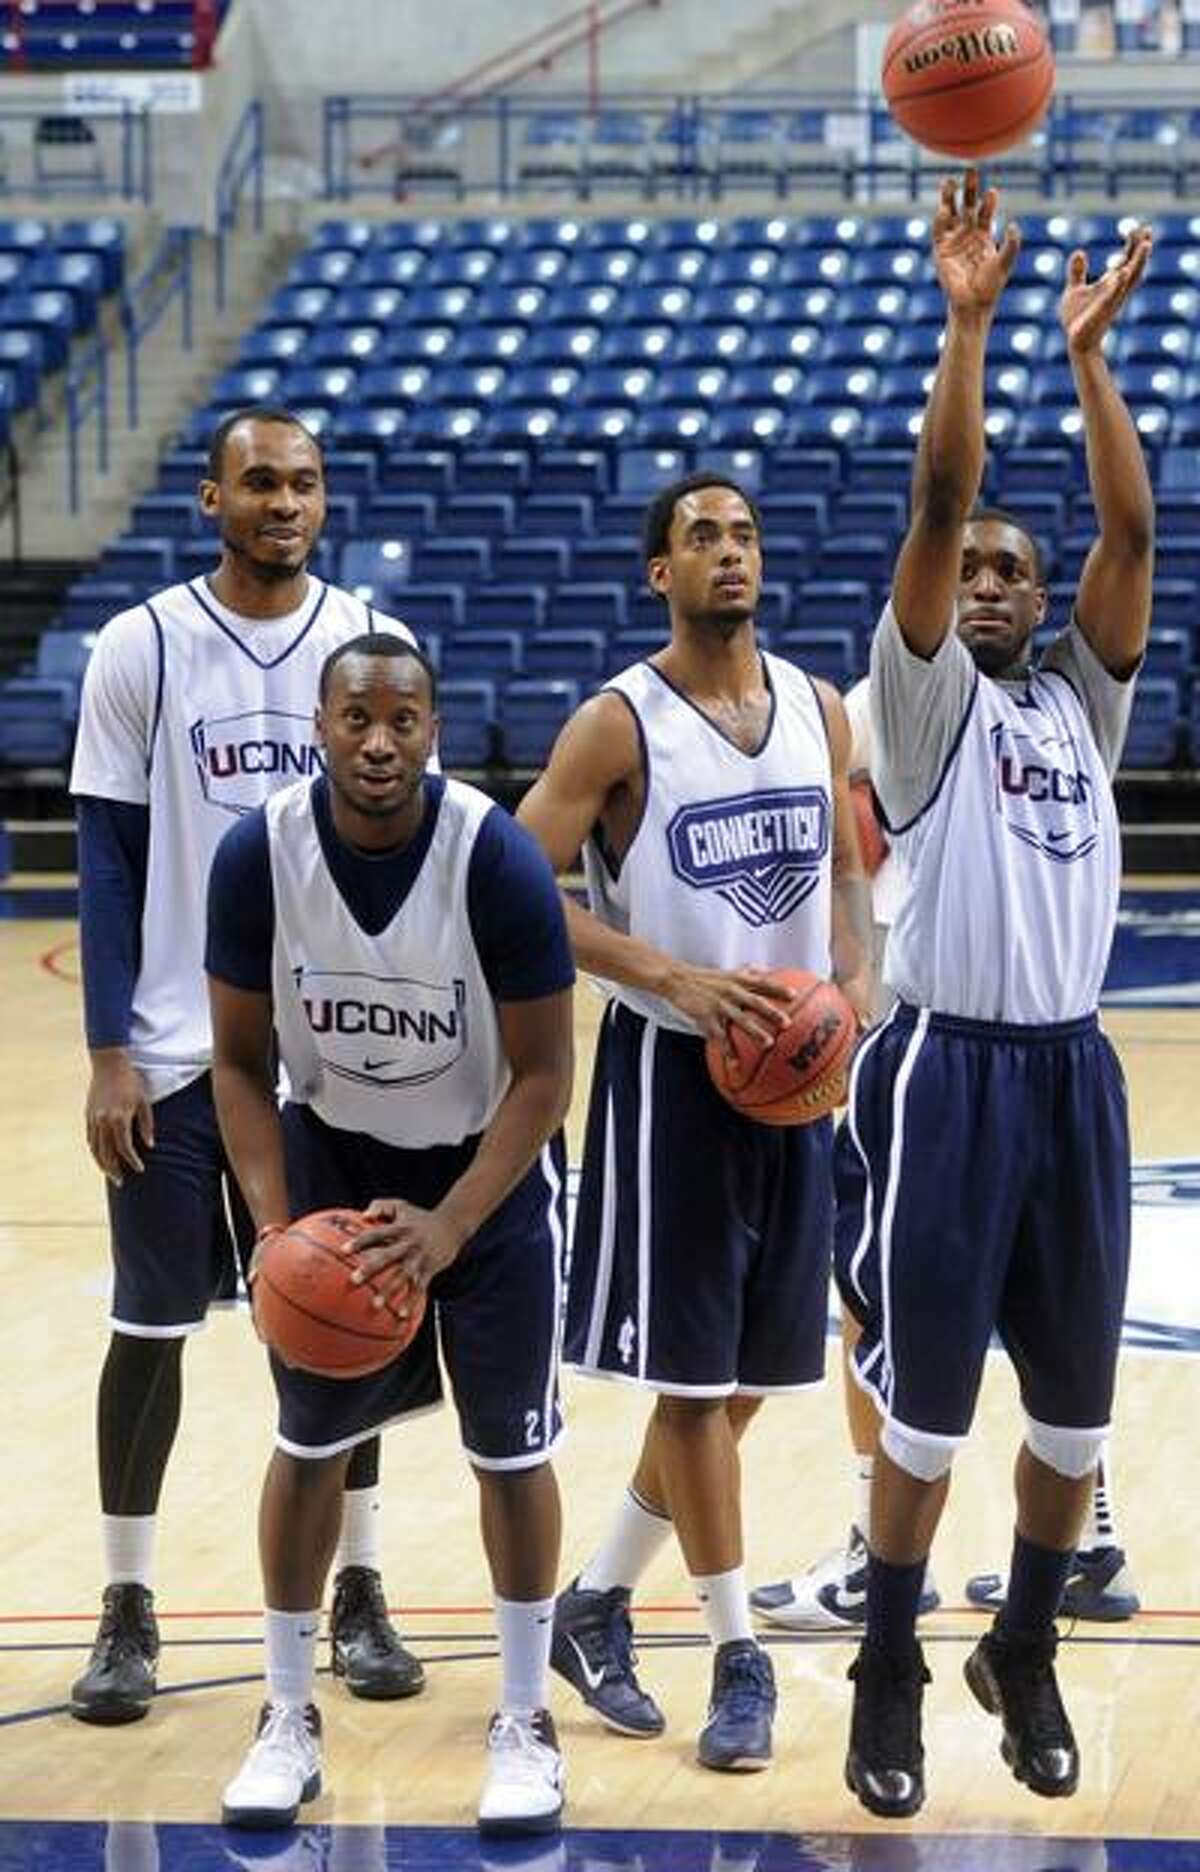 Storrs--UConn players (left to right) Charles Okwandu, Donnell Beverly, Jamal Coombs-McDaniel and Kemba Walker during practice at Gampel Pavilion Tuesday. Photo by Brad Horrigan/New Haven Register-03.29.11.